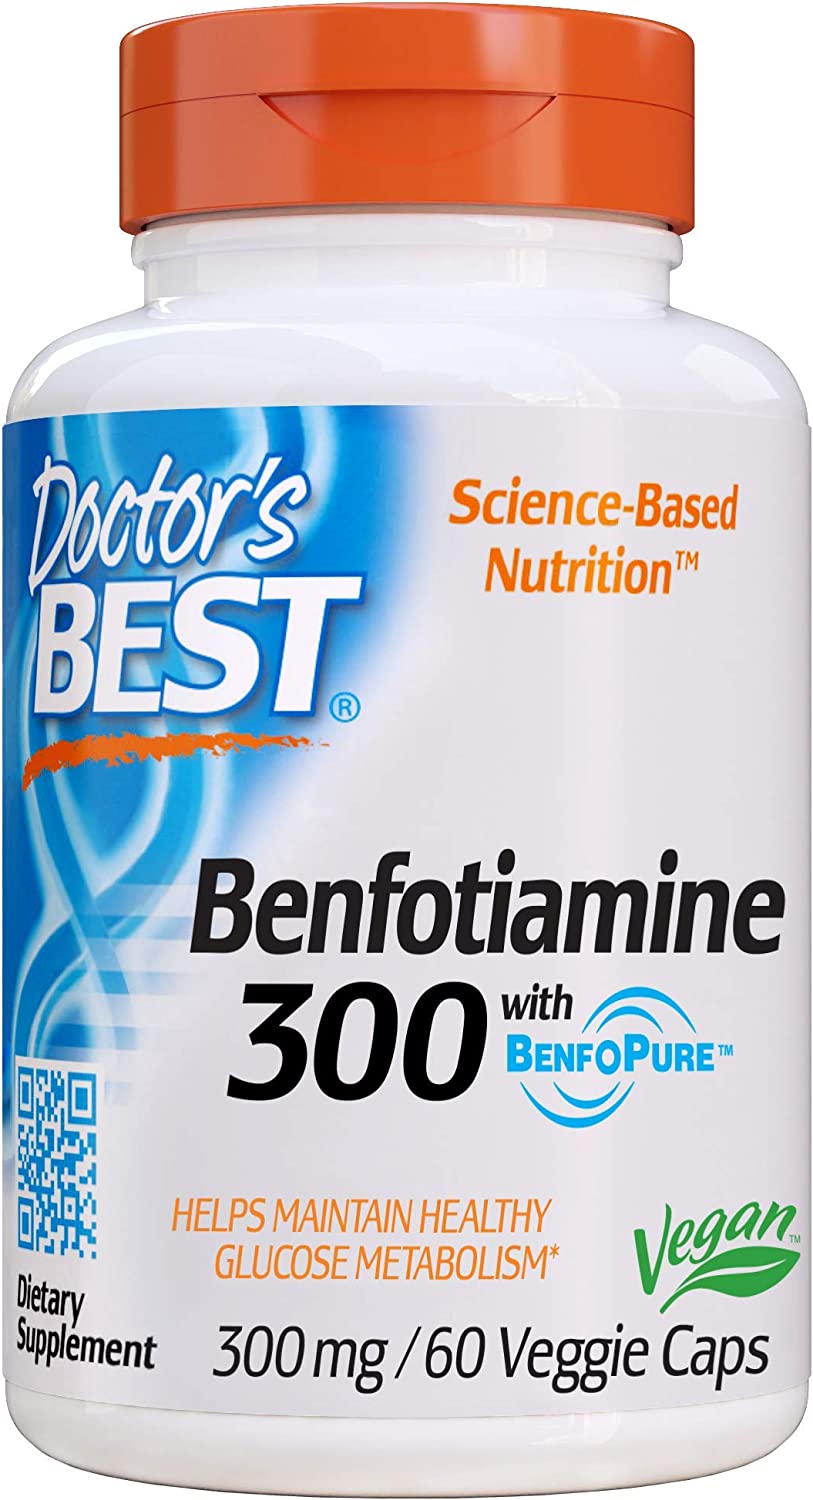 Doctor's Best Benfotiamine 300mg with BenfoPure Helps Maintain Blood Sugar Levels - 60 Veggie Caps